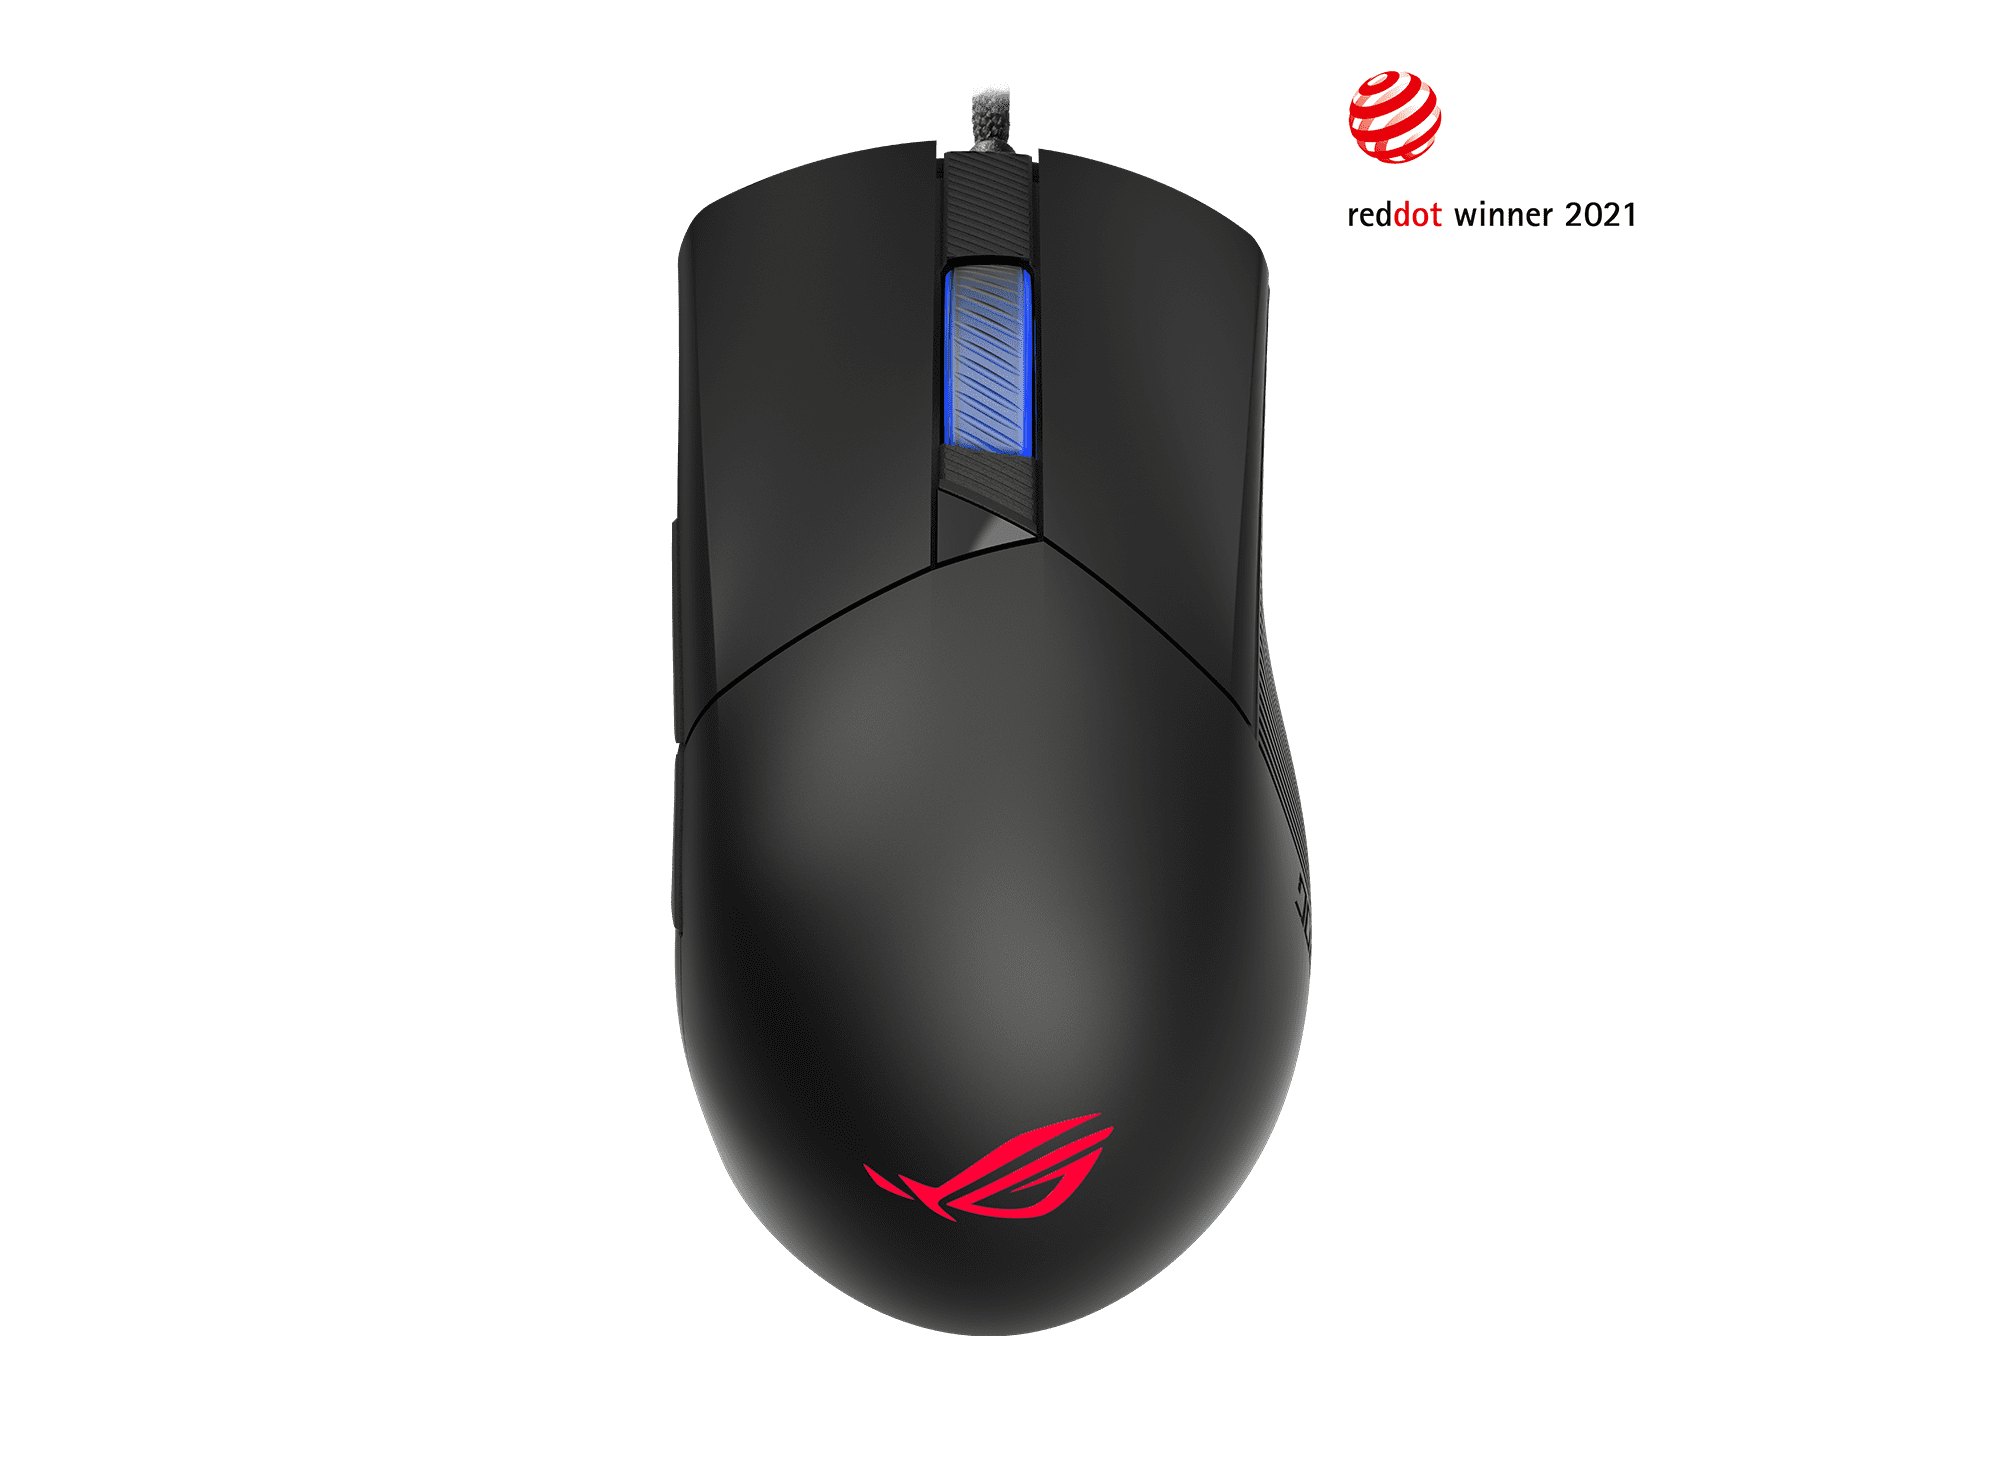 Marvel organic cylinder ASUS ROG Gladius III Wired Gaming Mouse | Tuned 19,000 DPI Sensor, Hot  Swappable Push-Fit II Switches, Ergo Shape, ROG Omni Mouse Feet, ROG  Paracord and Aura Sync RGB Lighting - Walmart.com